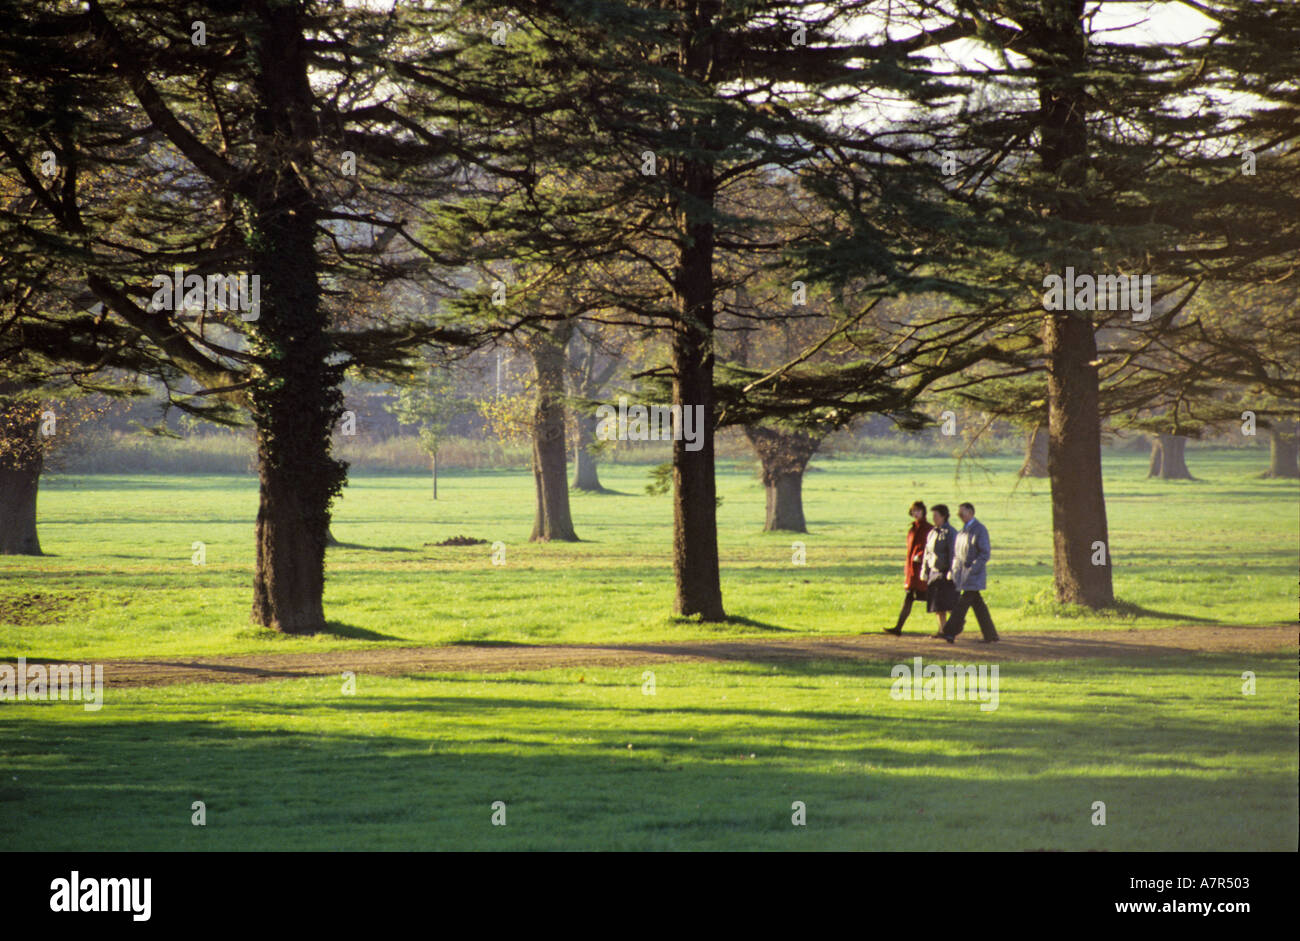 Three adults walking among trees in park South Wales UK Stock Photo